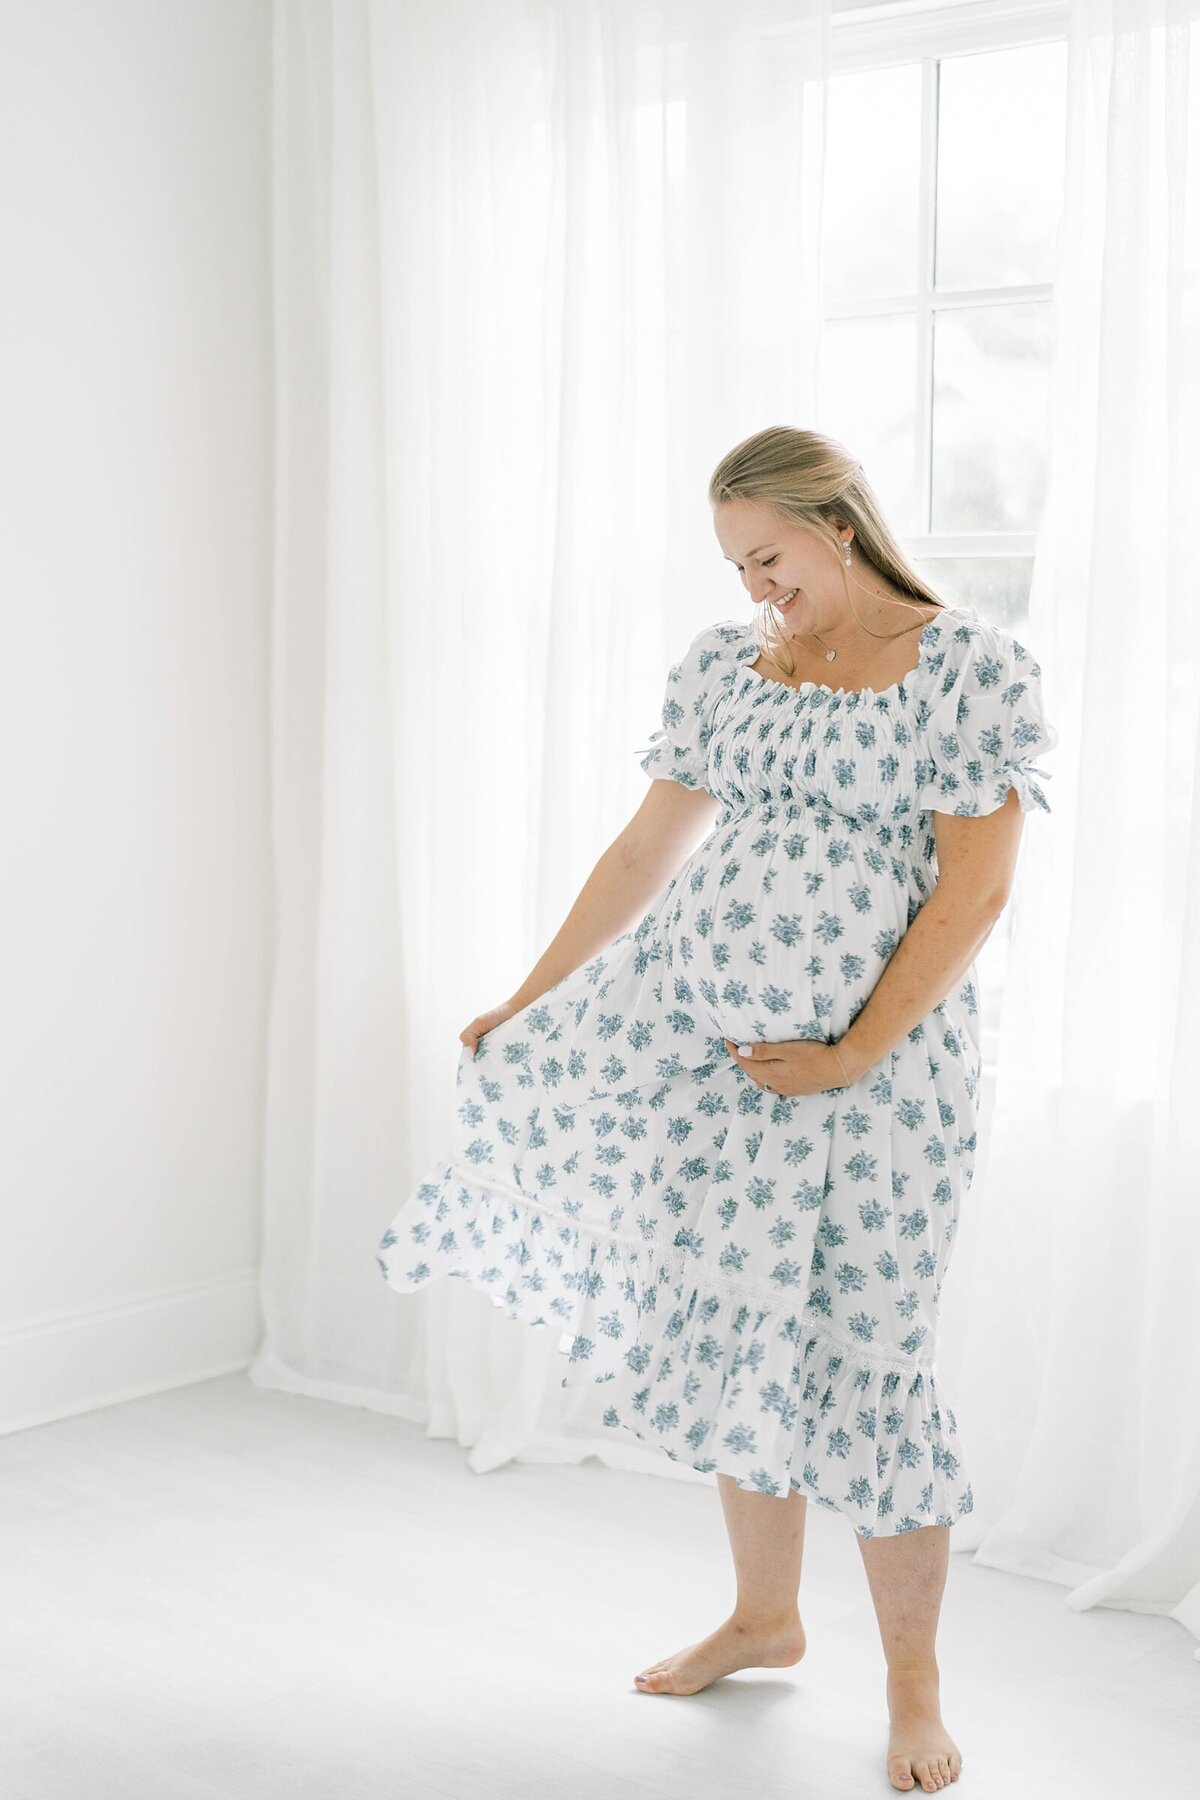 Roswell Maternity Photographer_0082